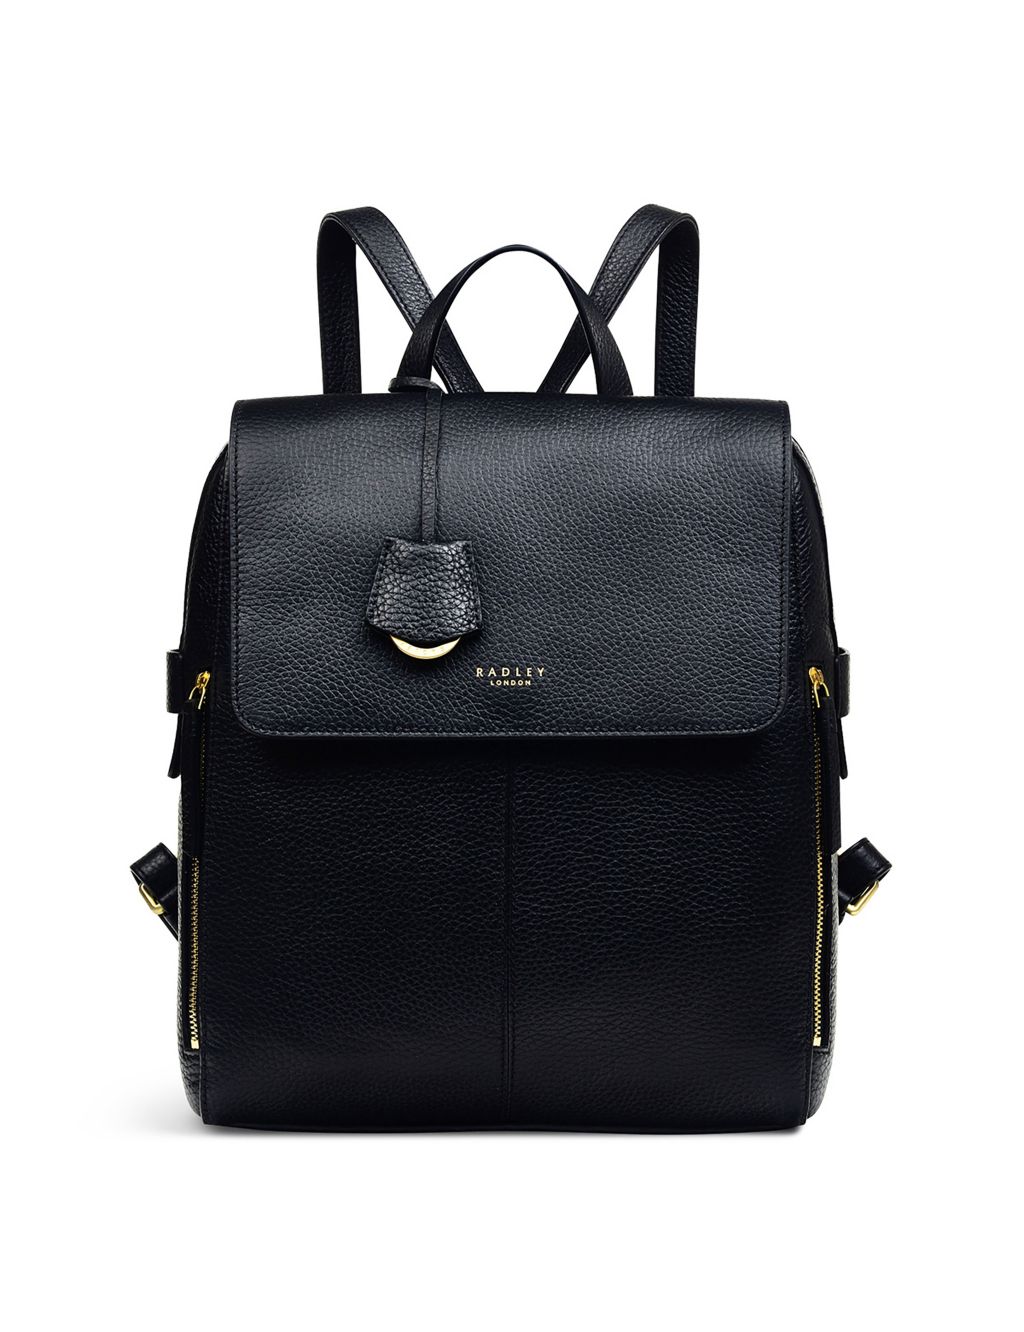 Lorne Close Leather Backpack